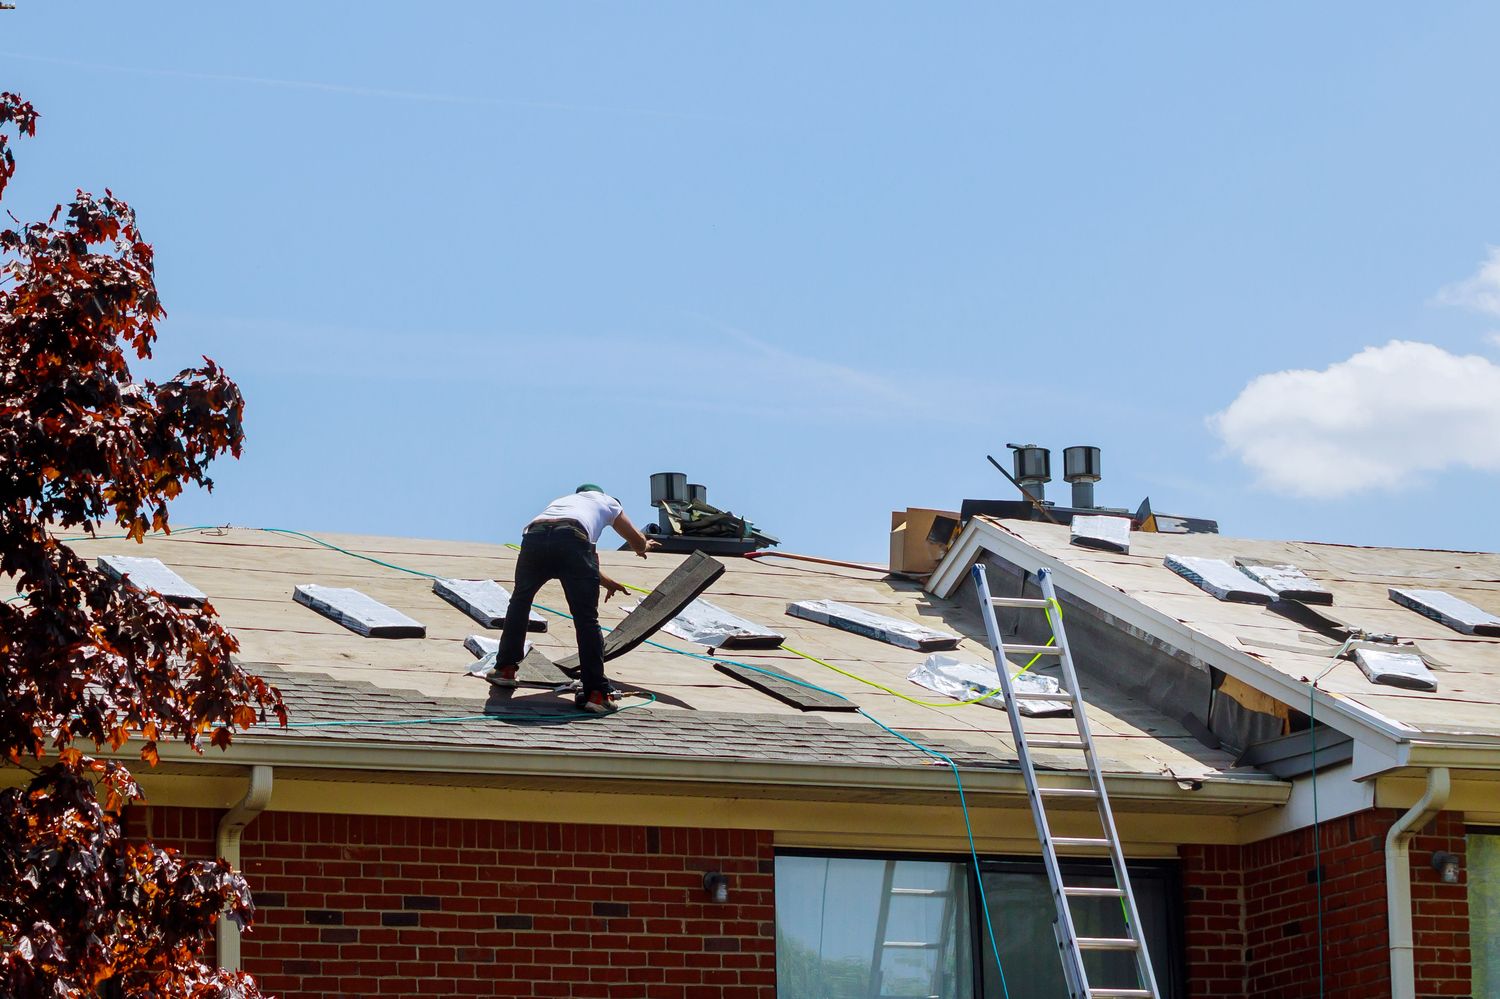 roof replacement cost, new roof cost